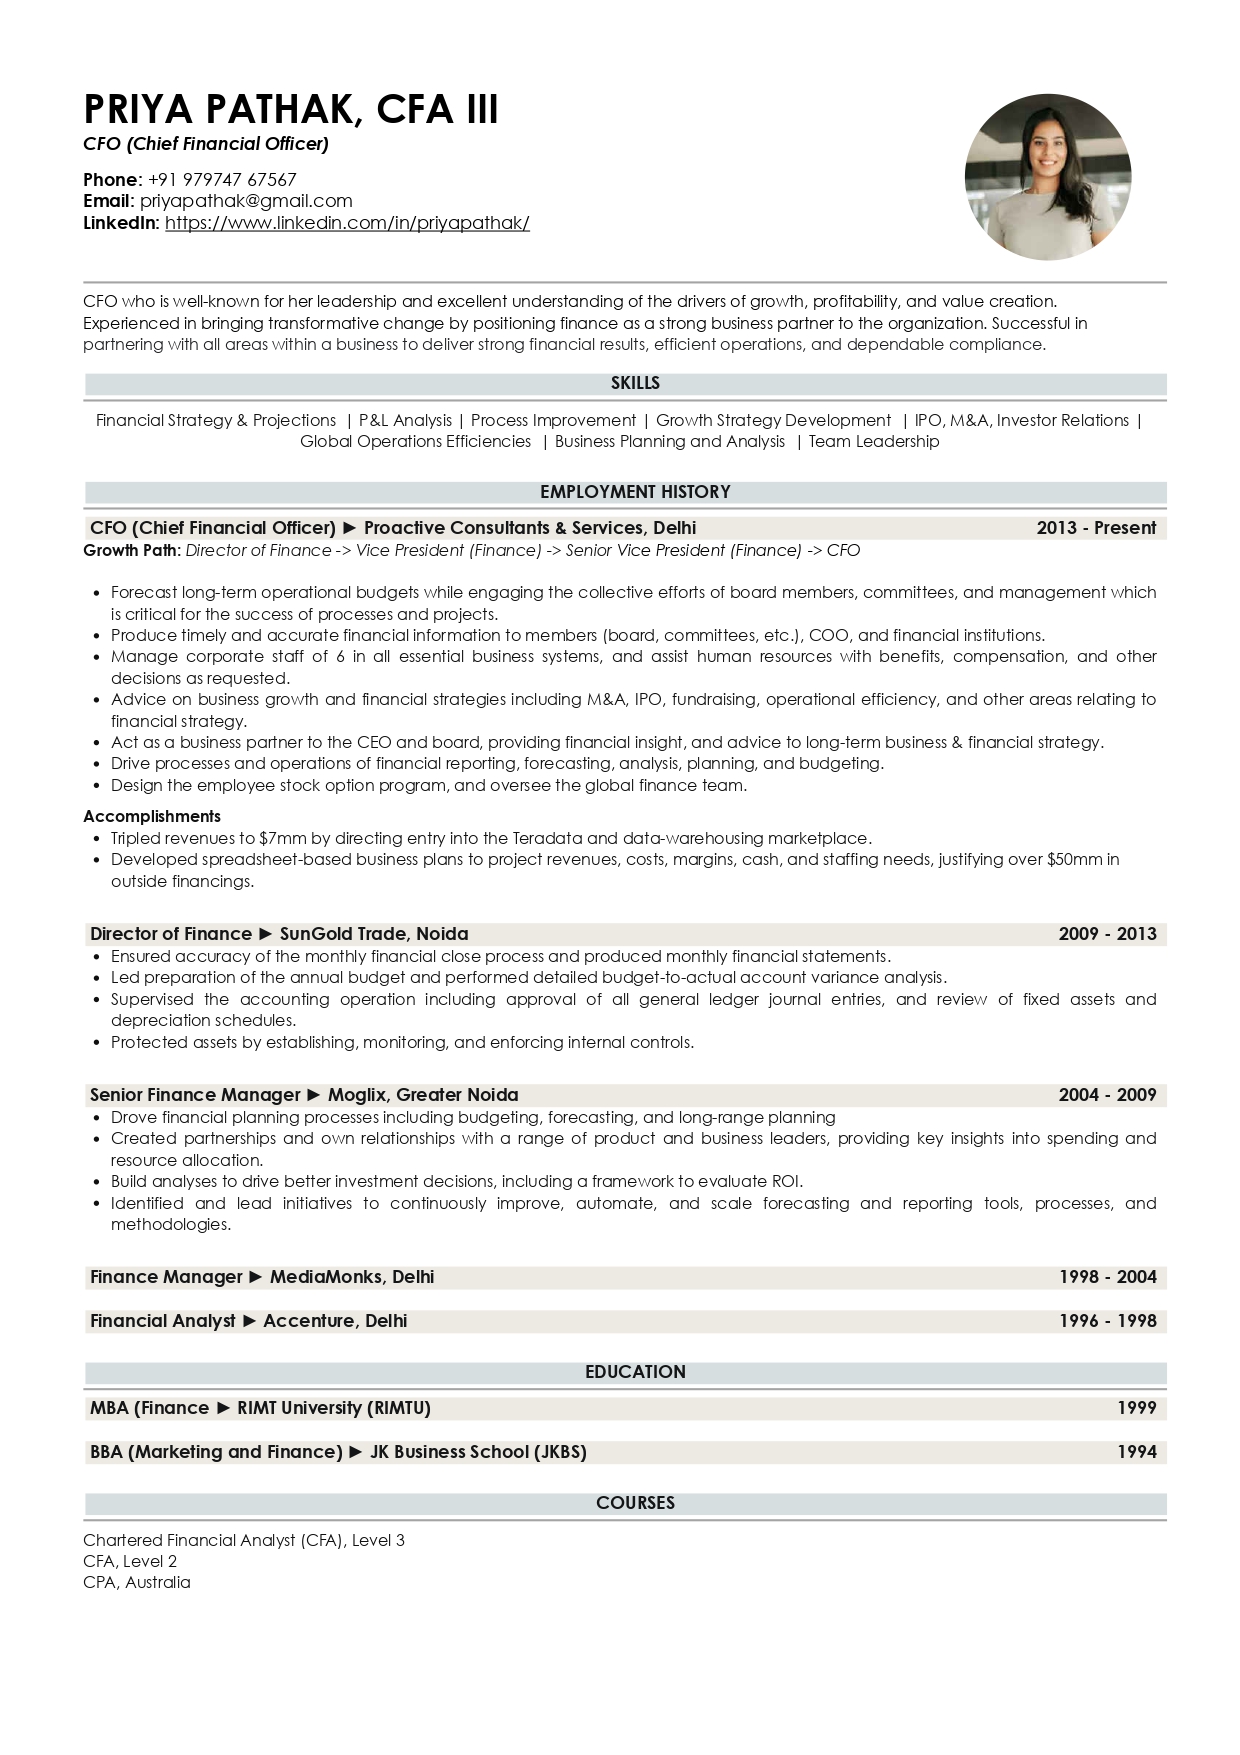 Resume of Chief Financial Officer (CFO)